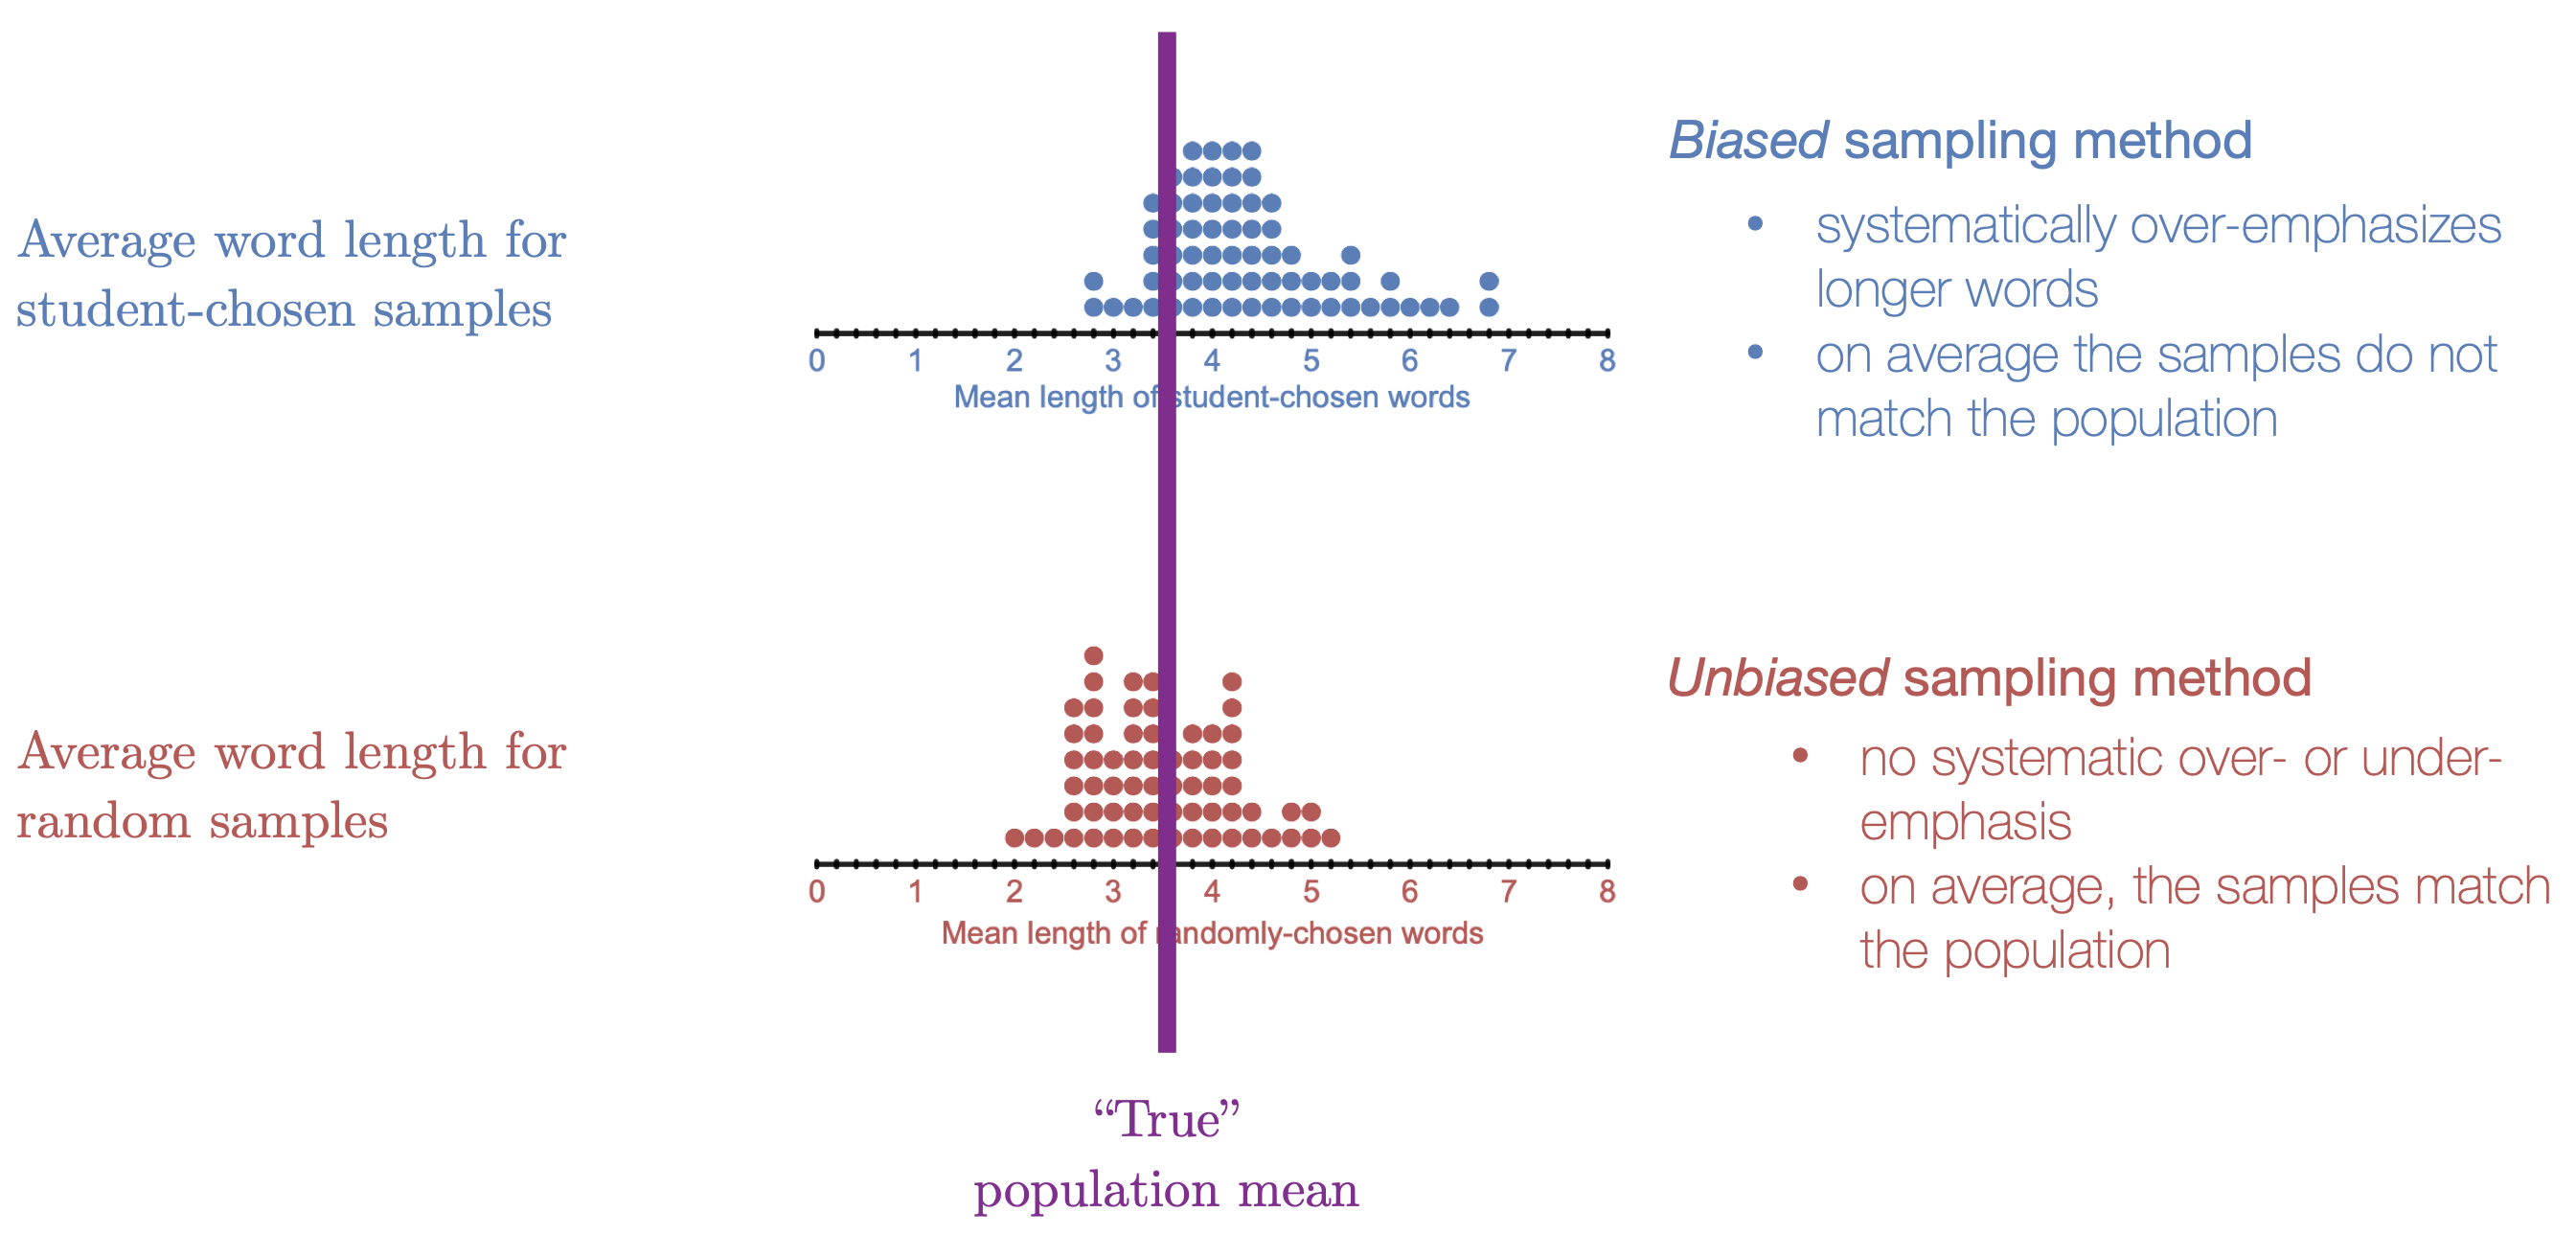 In the Crazy in Love activitiy, purposeful samping was a biased method becuase it systemaitcally over-emphasized longer words. Random samping is an unbiased sampling method.